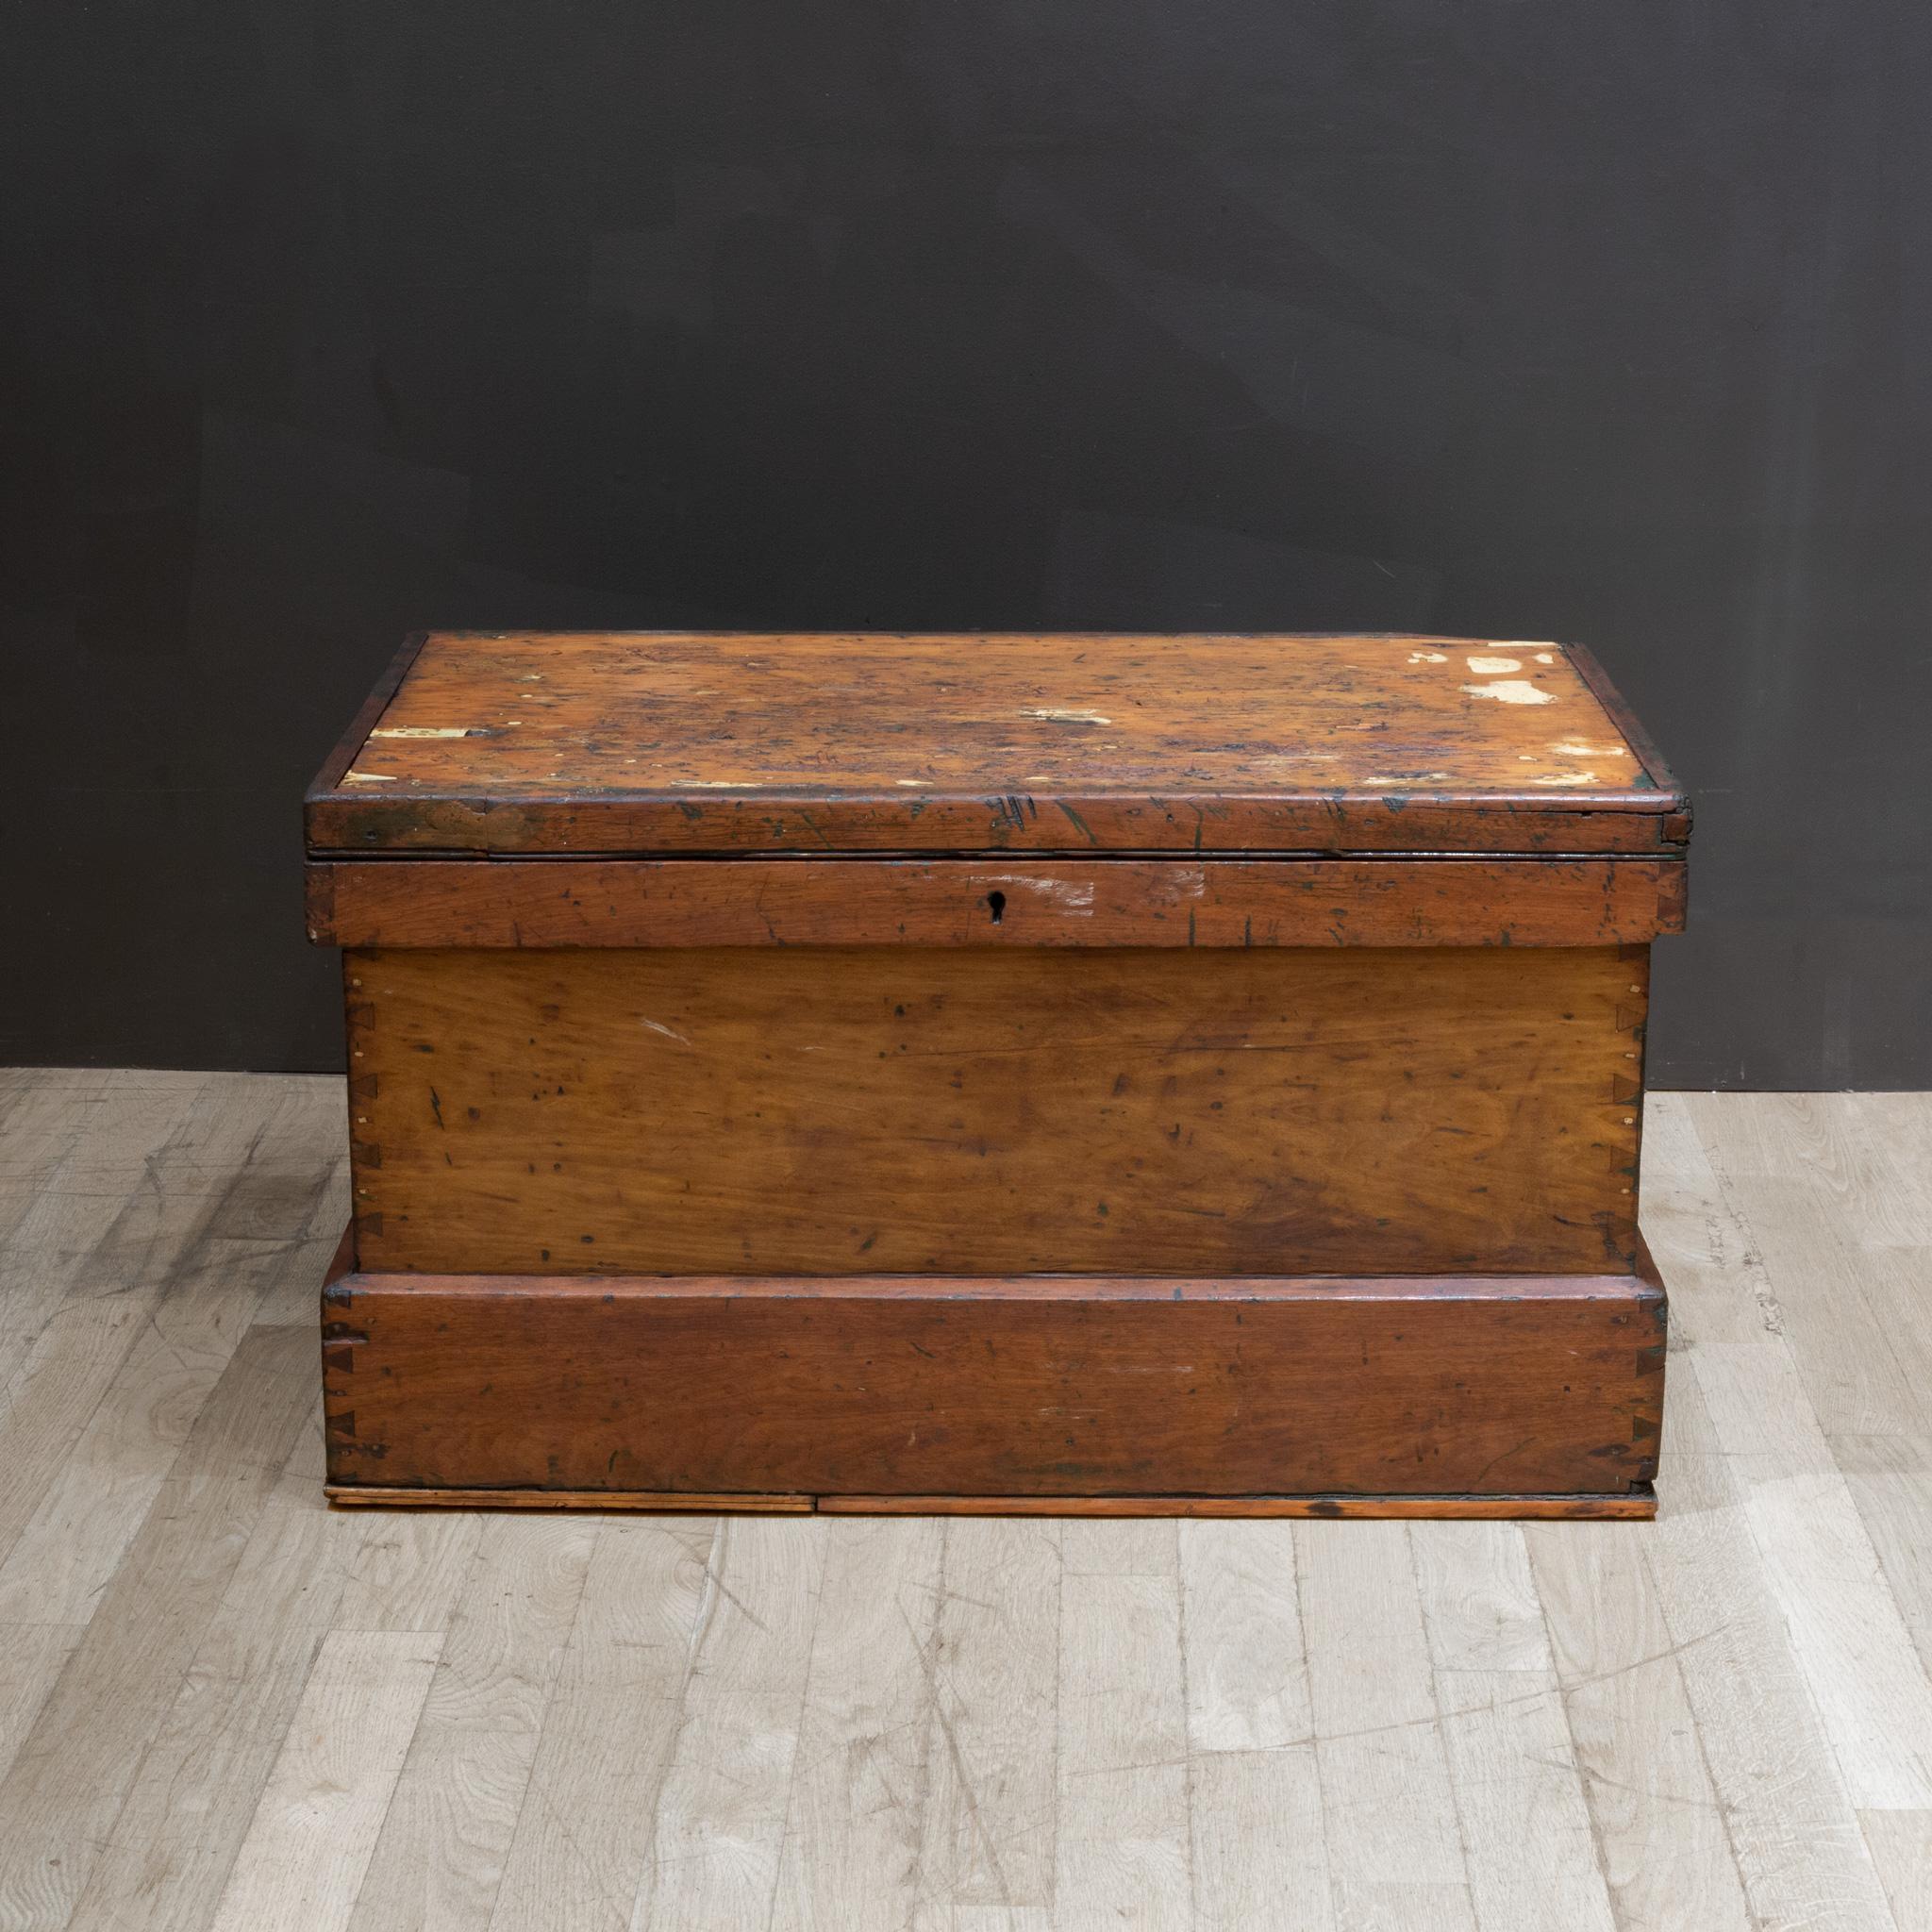 19th Century Late 19th / Early 20th C. Blanket Chest, C.1880-1920